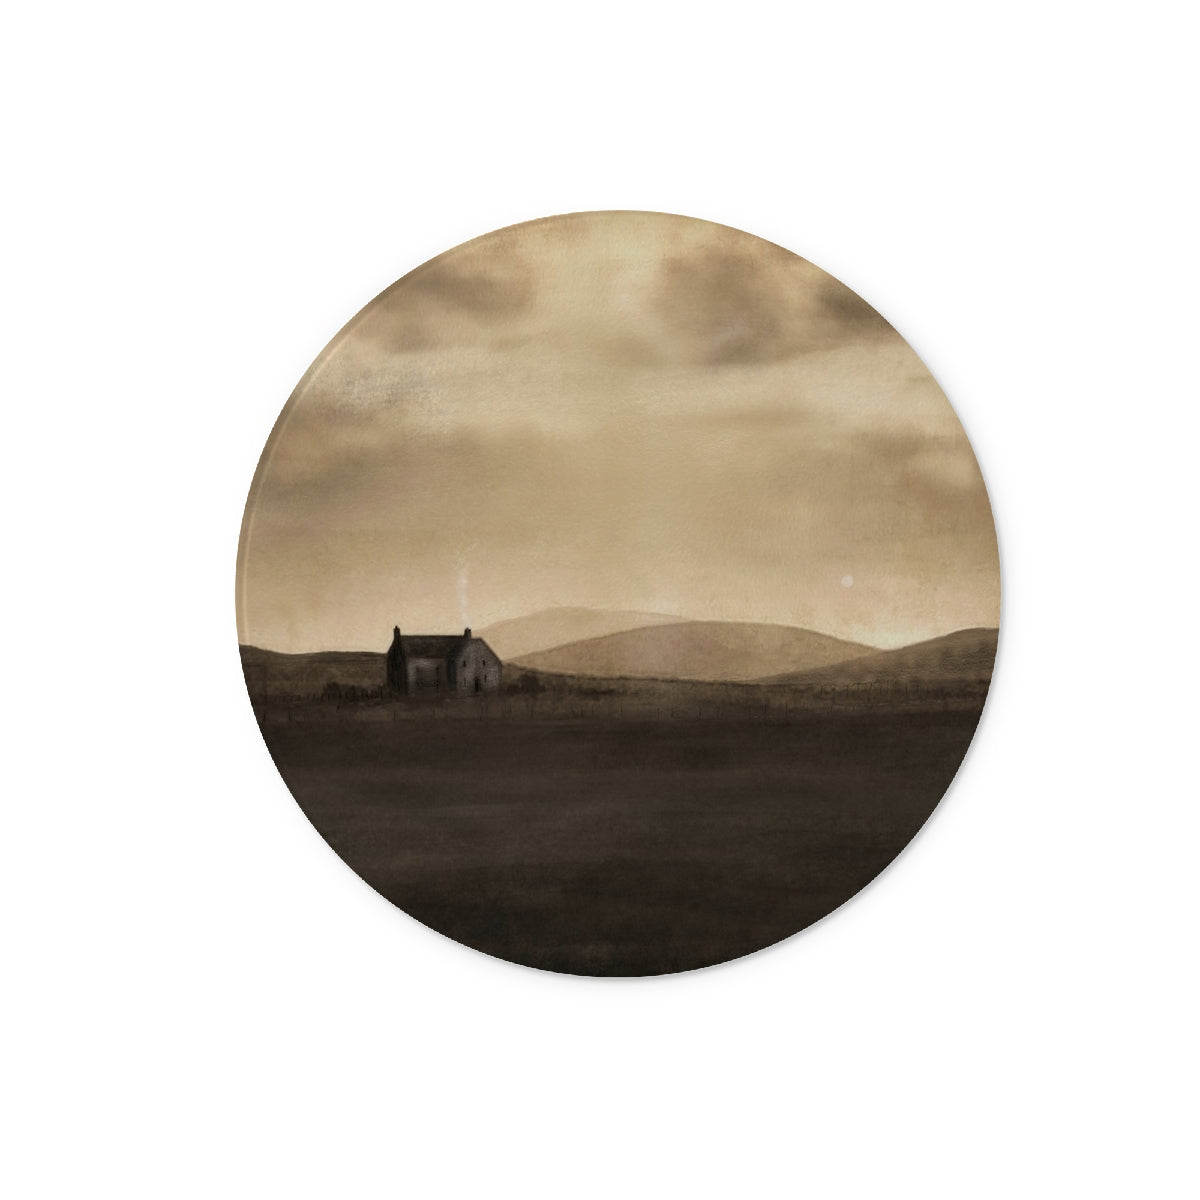 A Moonlit Croft Art Gifts Glass Chopping Board-Glass Chopping Boards-Hebridean Islands Art Gallery-12" Round-Paintings, Prints, Homeware, Art Gifts From Scotland By Scottish Artist Kevin Hunter